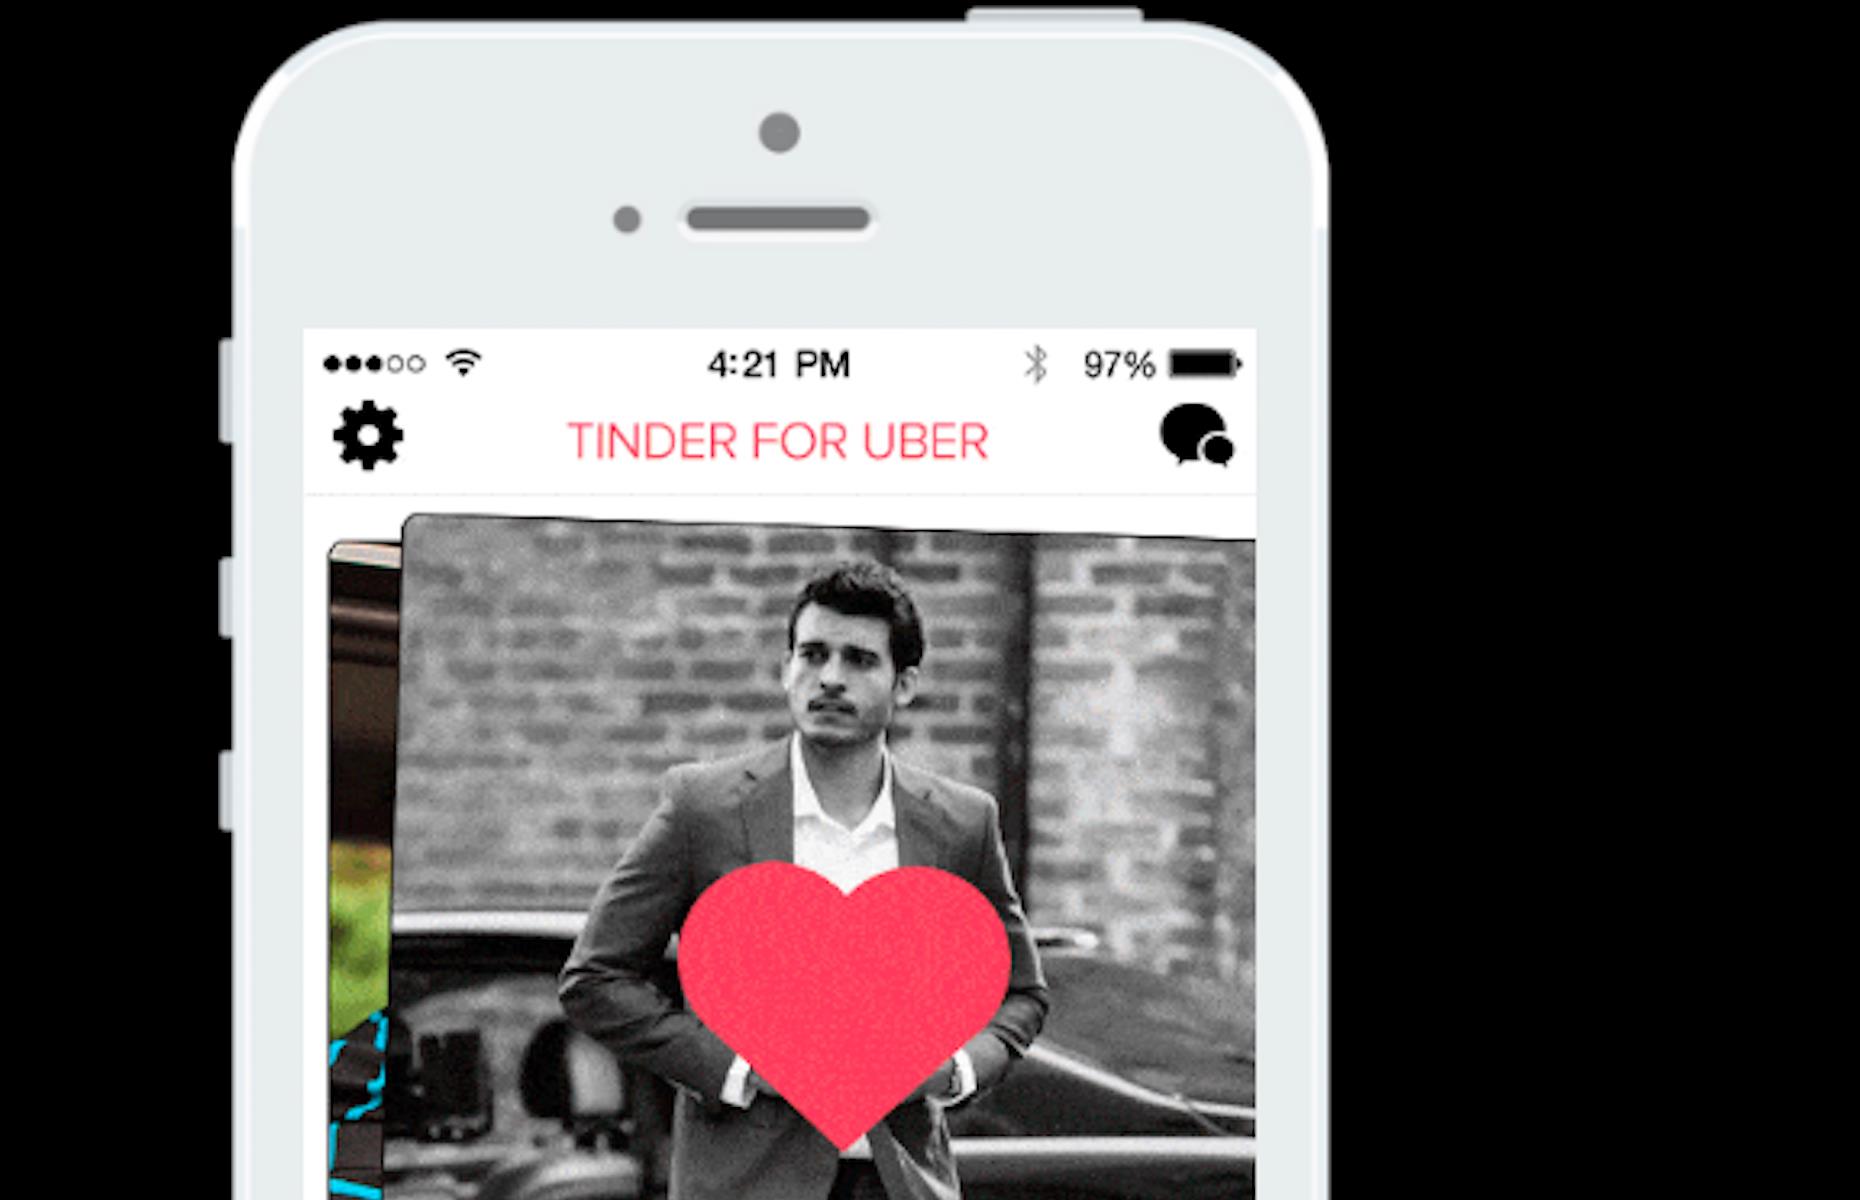 Tinder makes a match with Uber